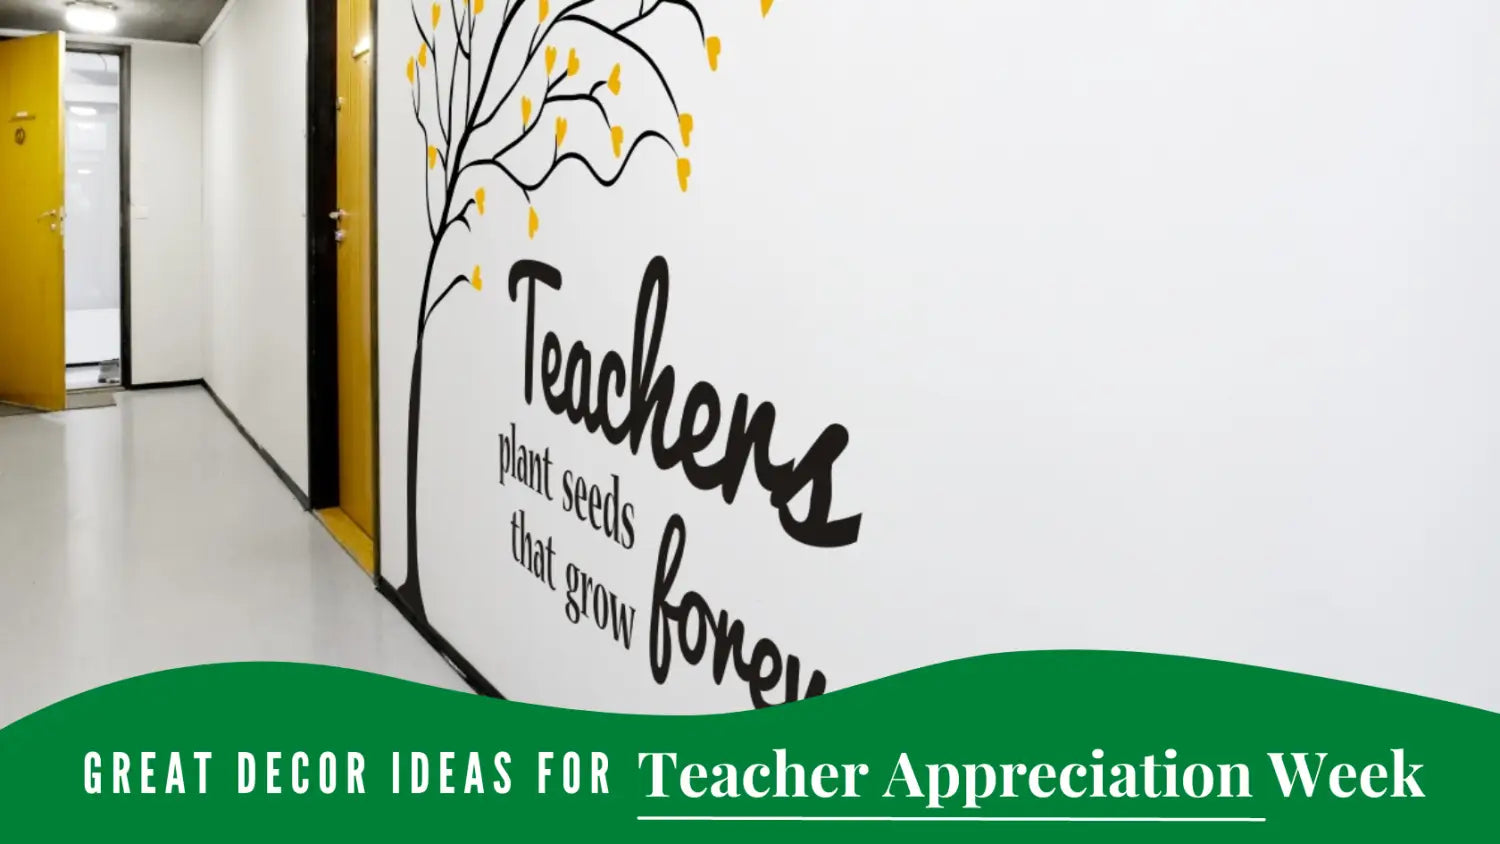 Teacher Appreciation Week Decor Ideas for School Walls and Classrooms to honor and celebrate teaching during Teacher Appreciation Week and all year through! By TheSimpleStencil.com